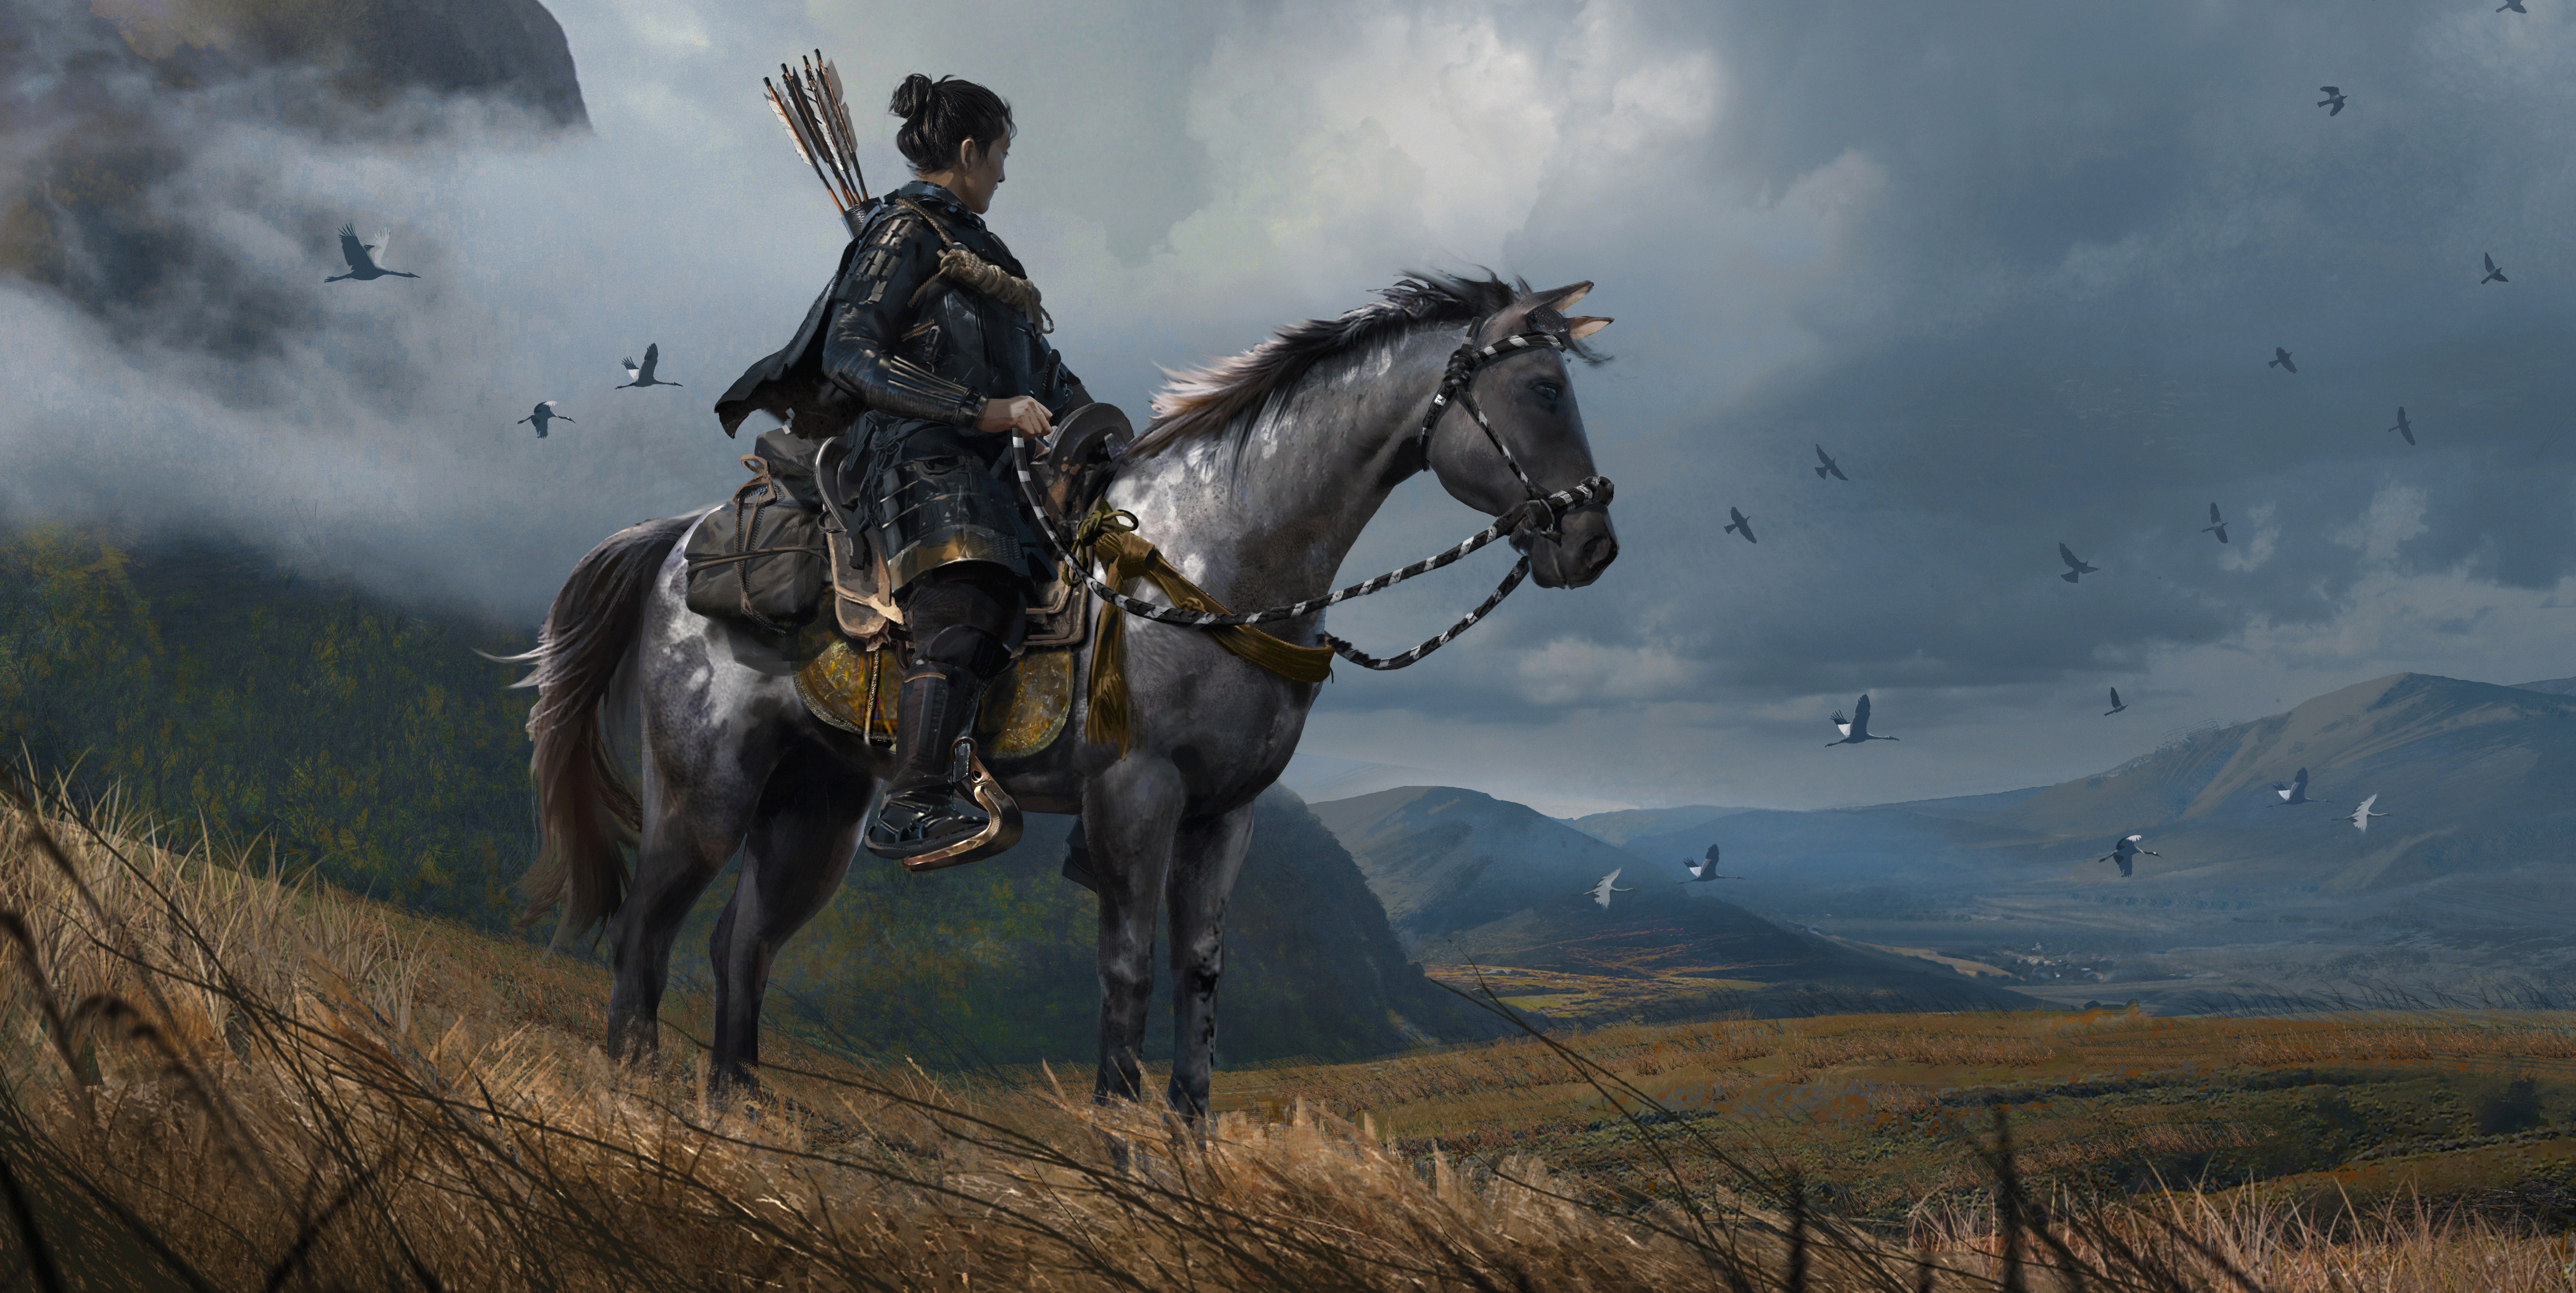 Ghost of Tsushima PC: Get Pc Version and System Requirements